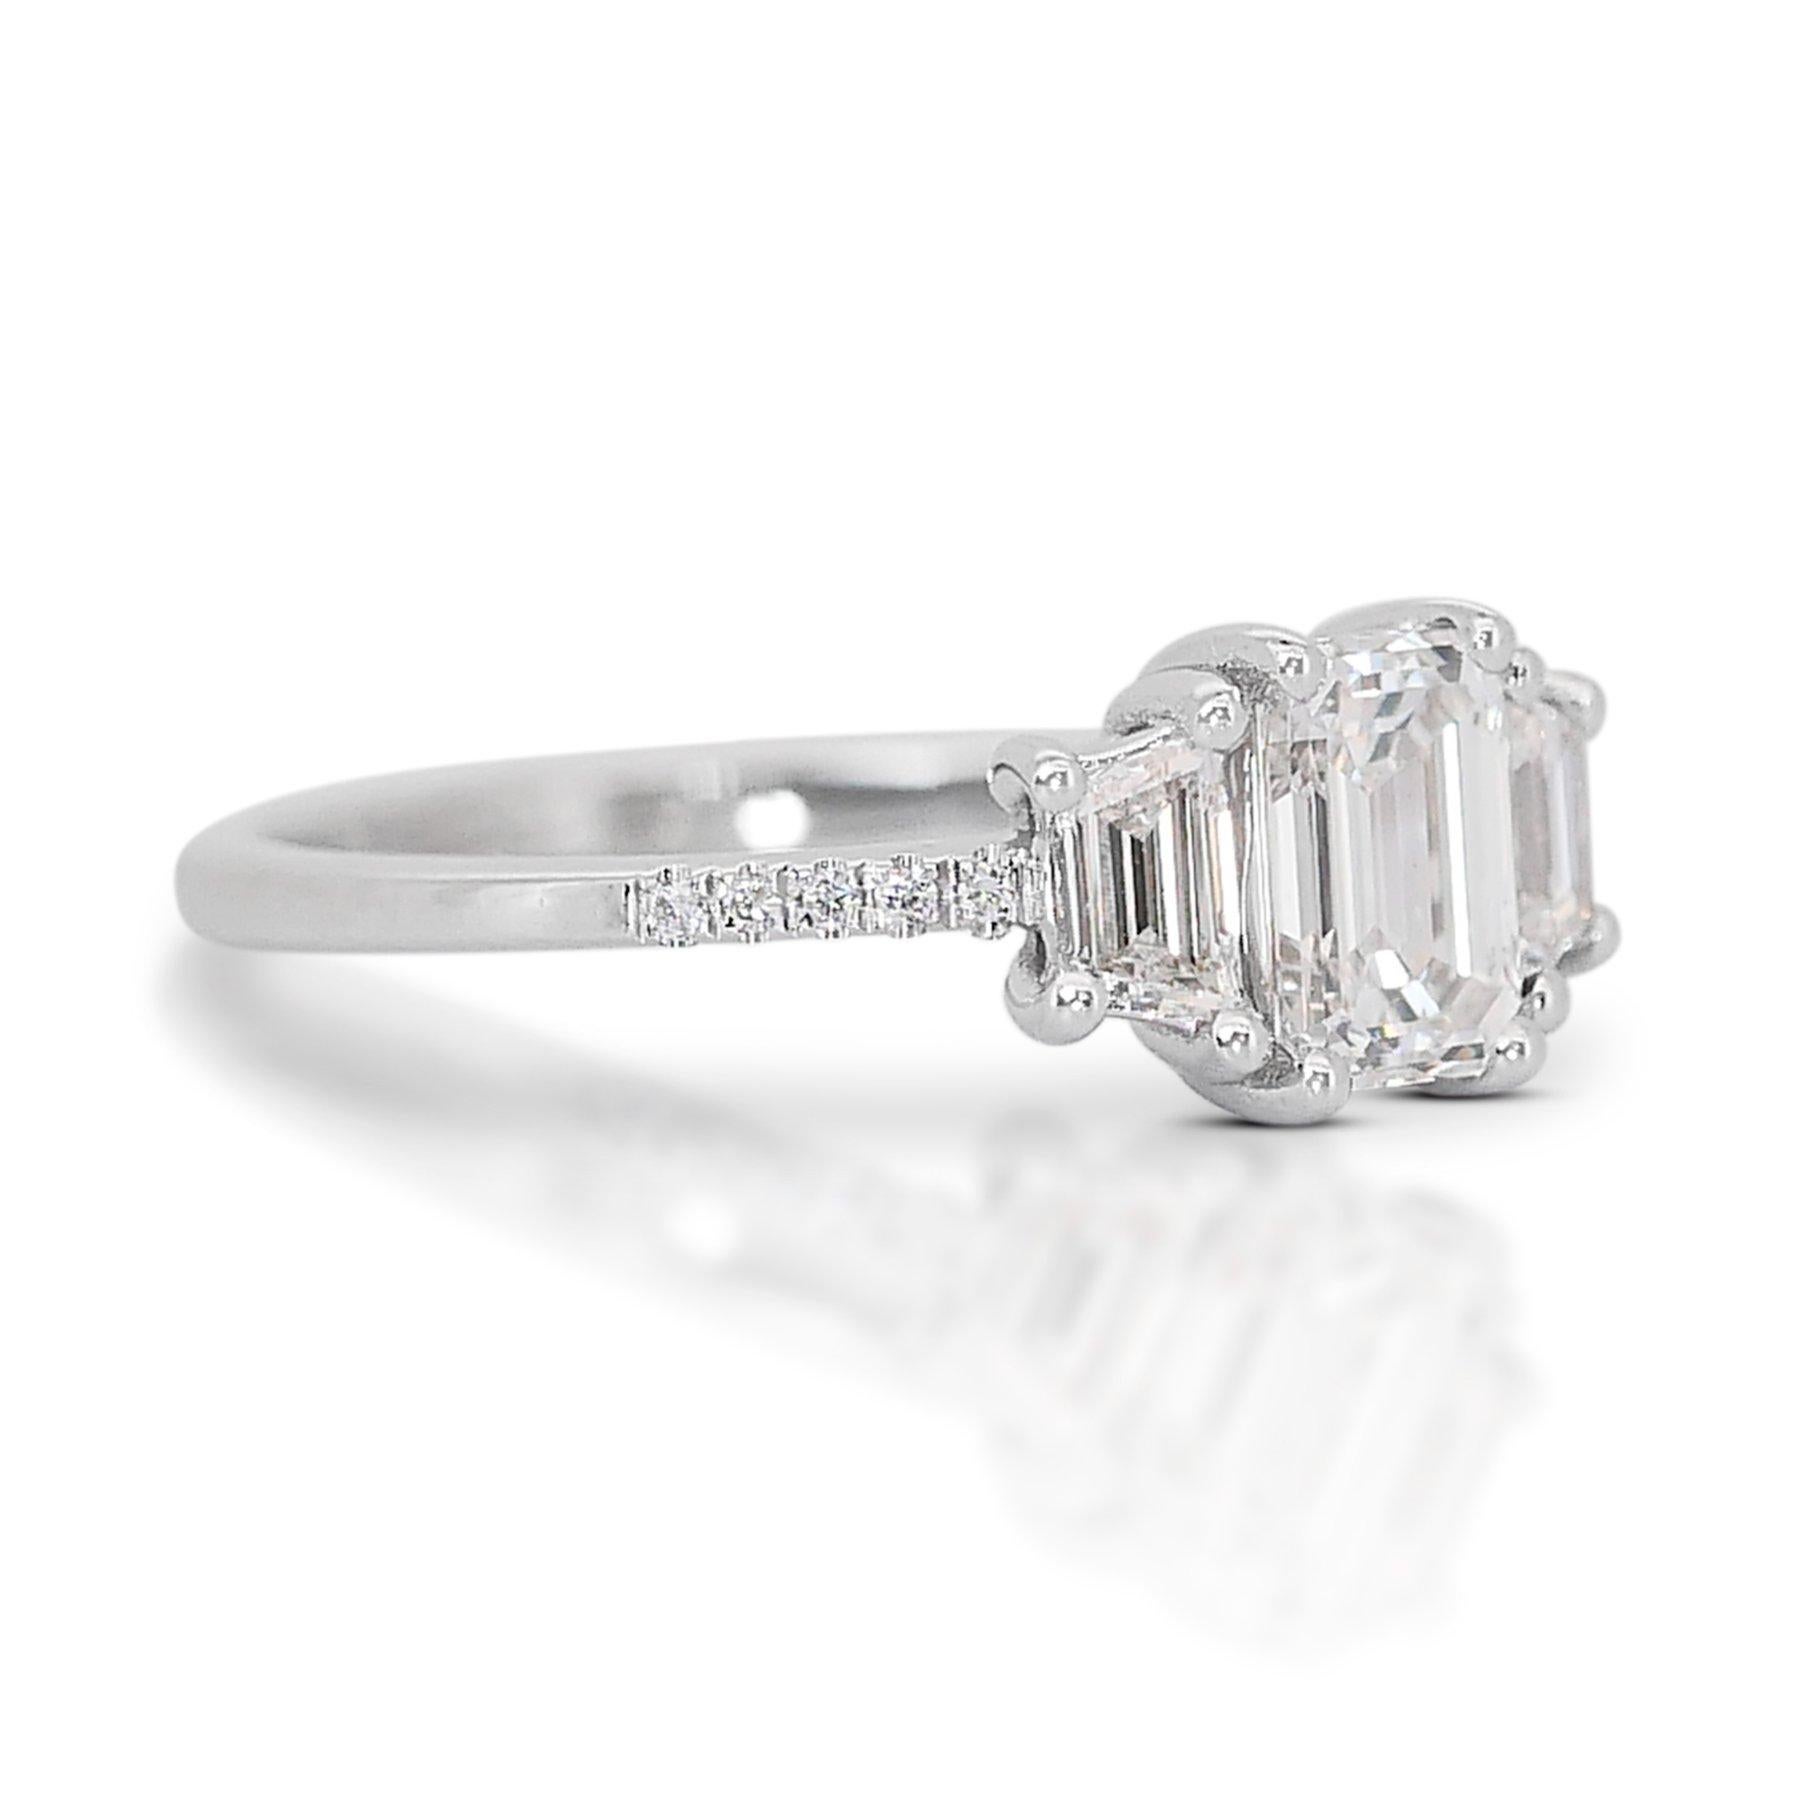 Elegant 1.11ct Diamond 3-Stone Ring in 18k White Gold - IGI Certified

Elevate your style with this 3-stone diamond ring, a stunning composition of clarity and brilliance set in 18k white gold. At the core of this ring lies a flawless 0.75-carat